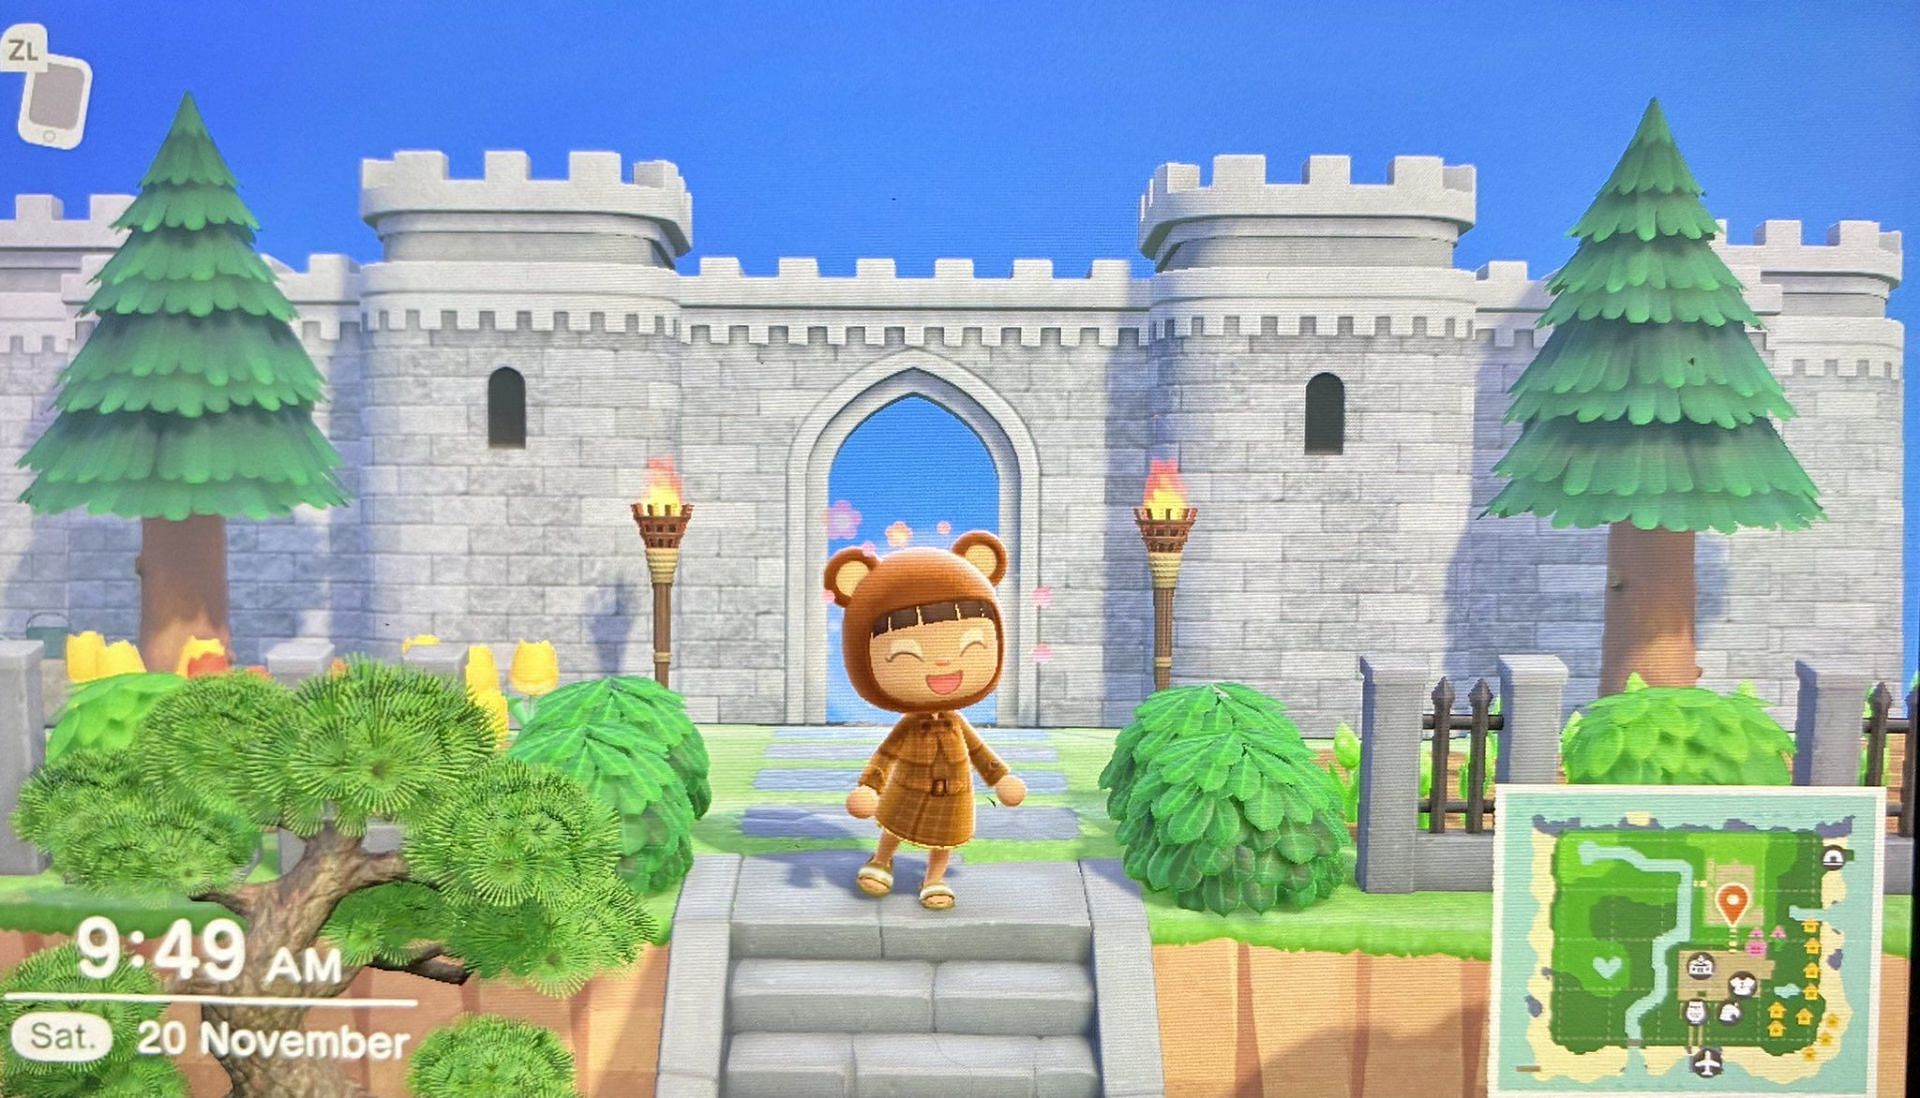 Possibilities become endless as Animal Crossing players discover they can place items on castle towers (Image via Sregion/Twitter)